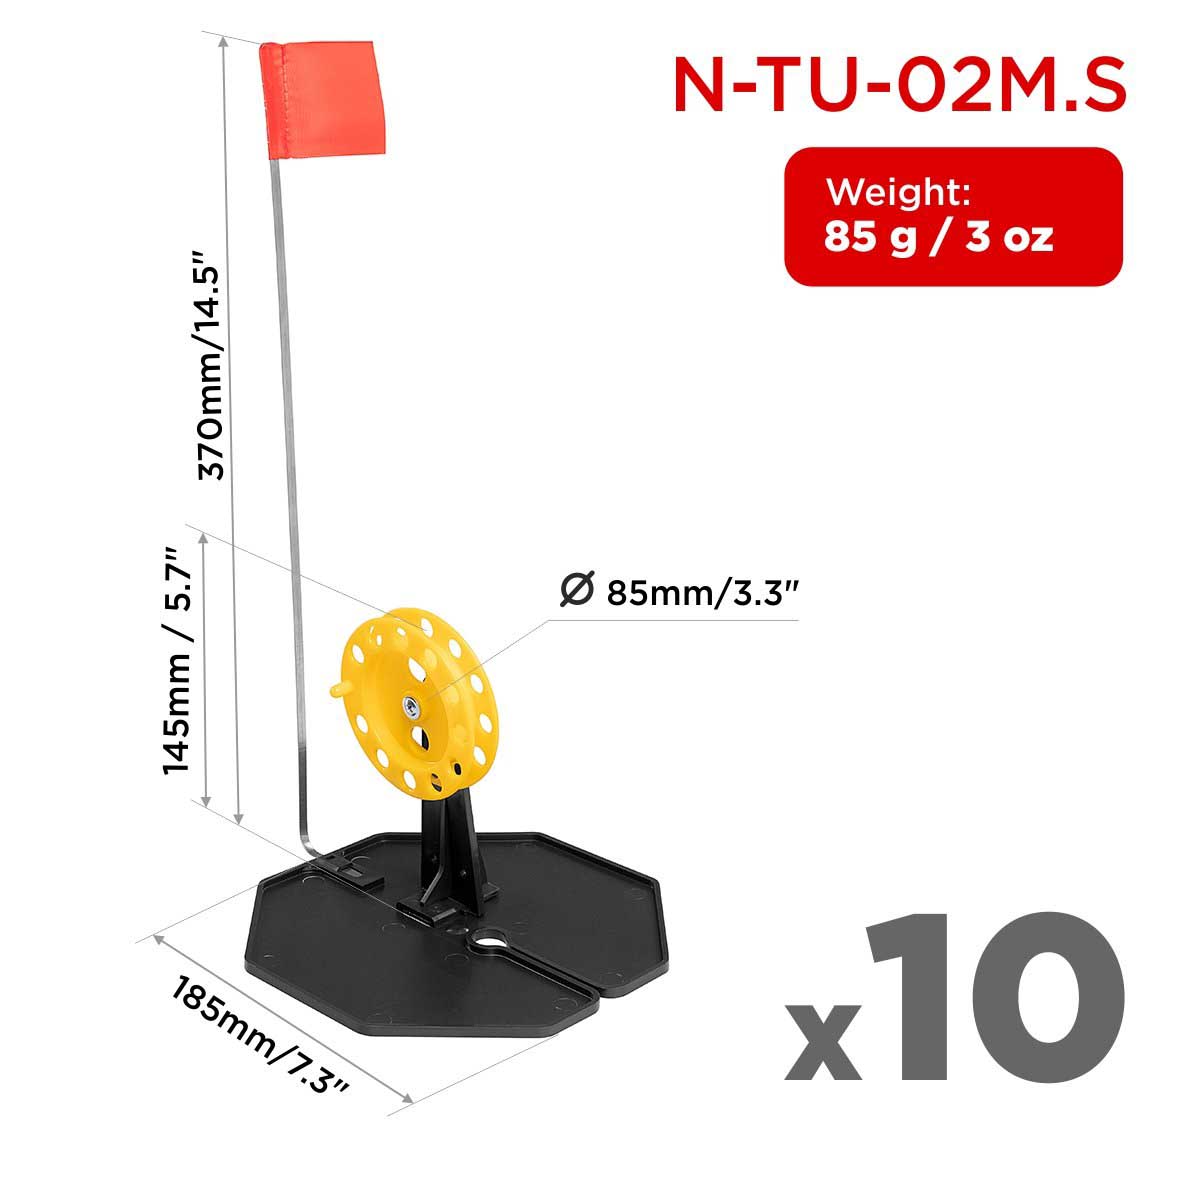 Set of 10 Tip-up Pop-Up Integrated Hole-Cover Easy to Clip N-Tu-02M. Each weighs 3 oz, the base is 7.3 inches long, the flag shaft is 14.5 inches, the spool diameter is 3.3 inches and its height is 5.7 inches